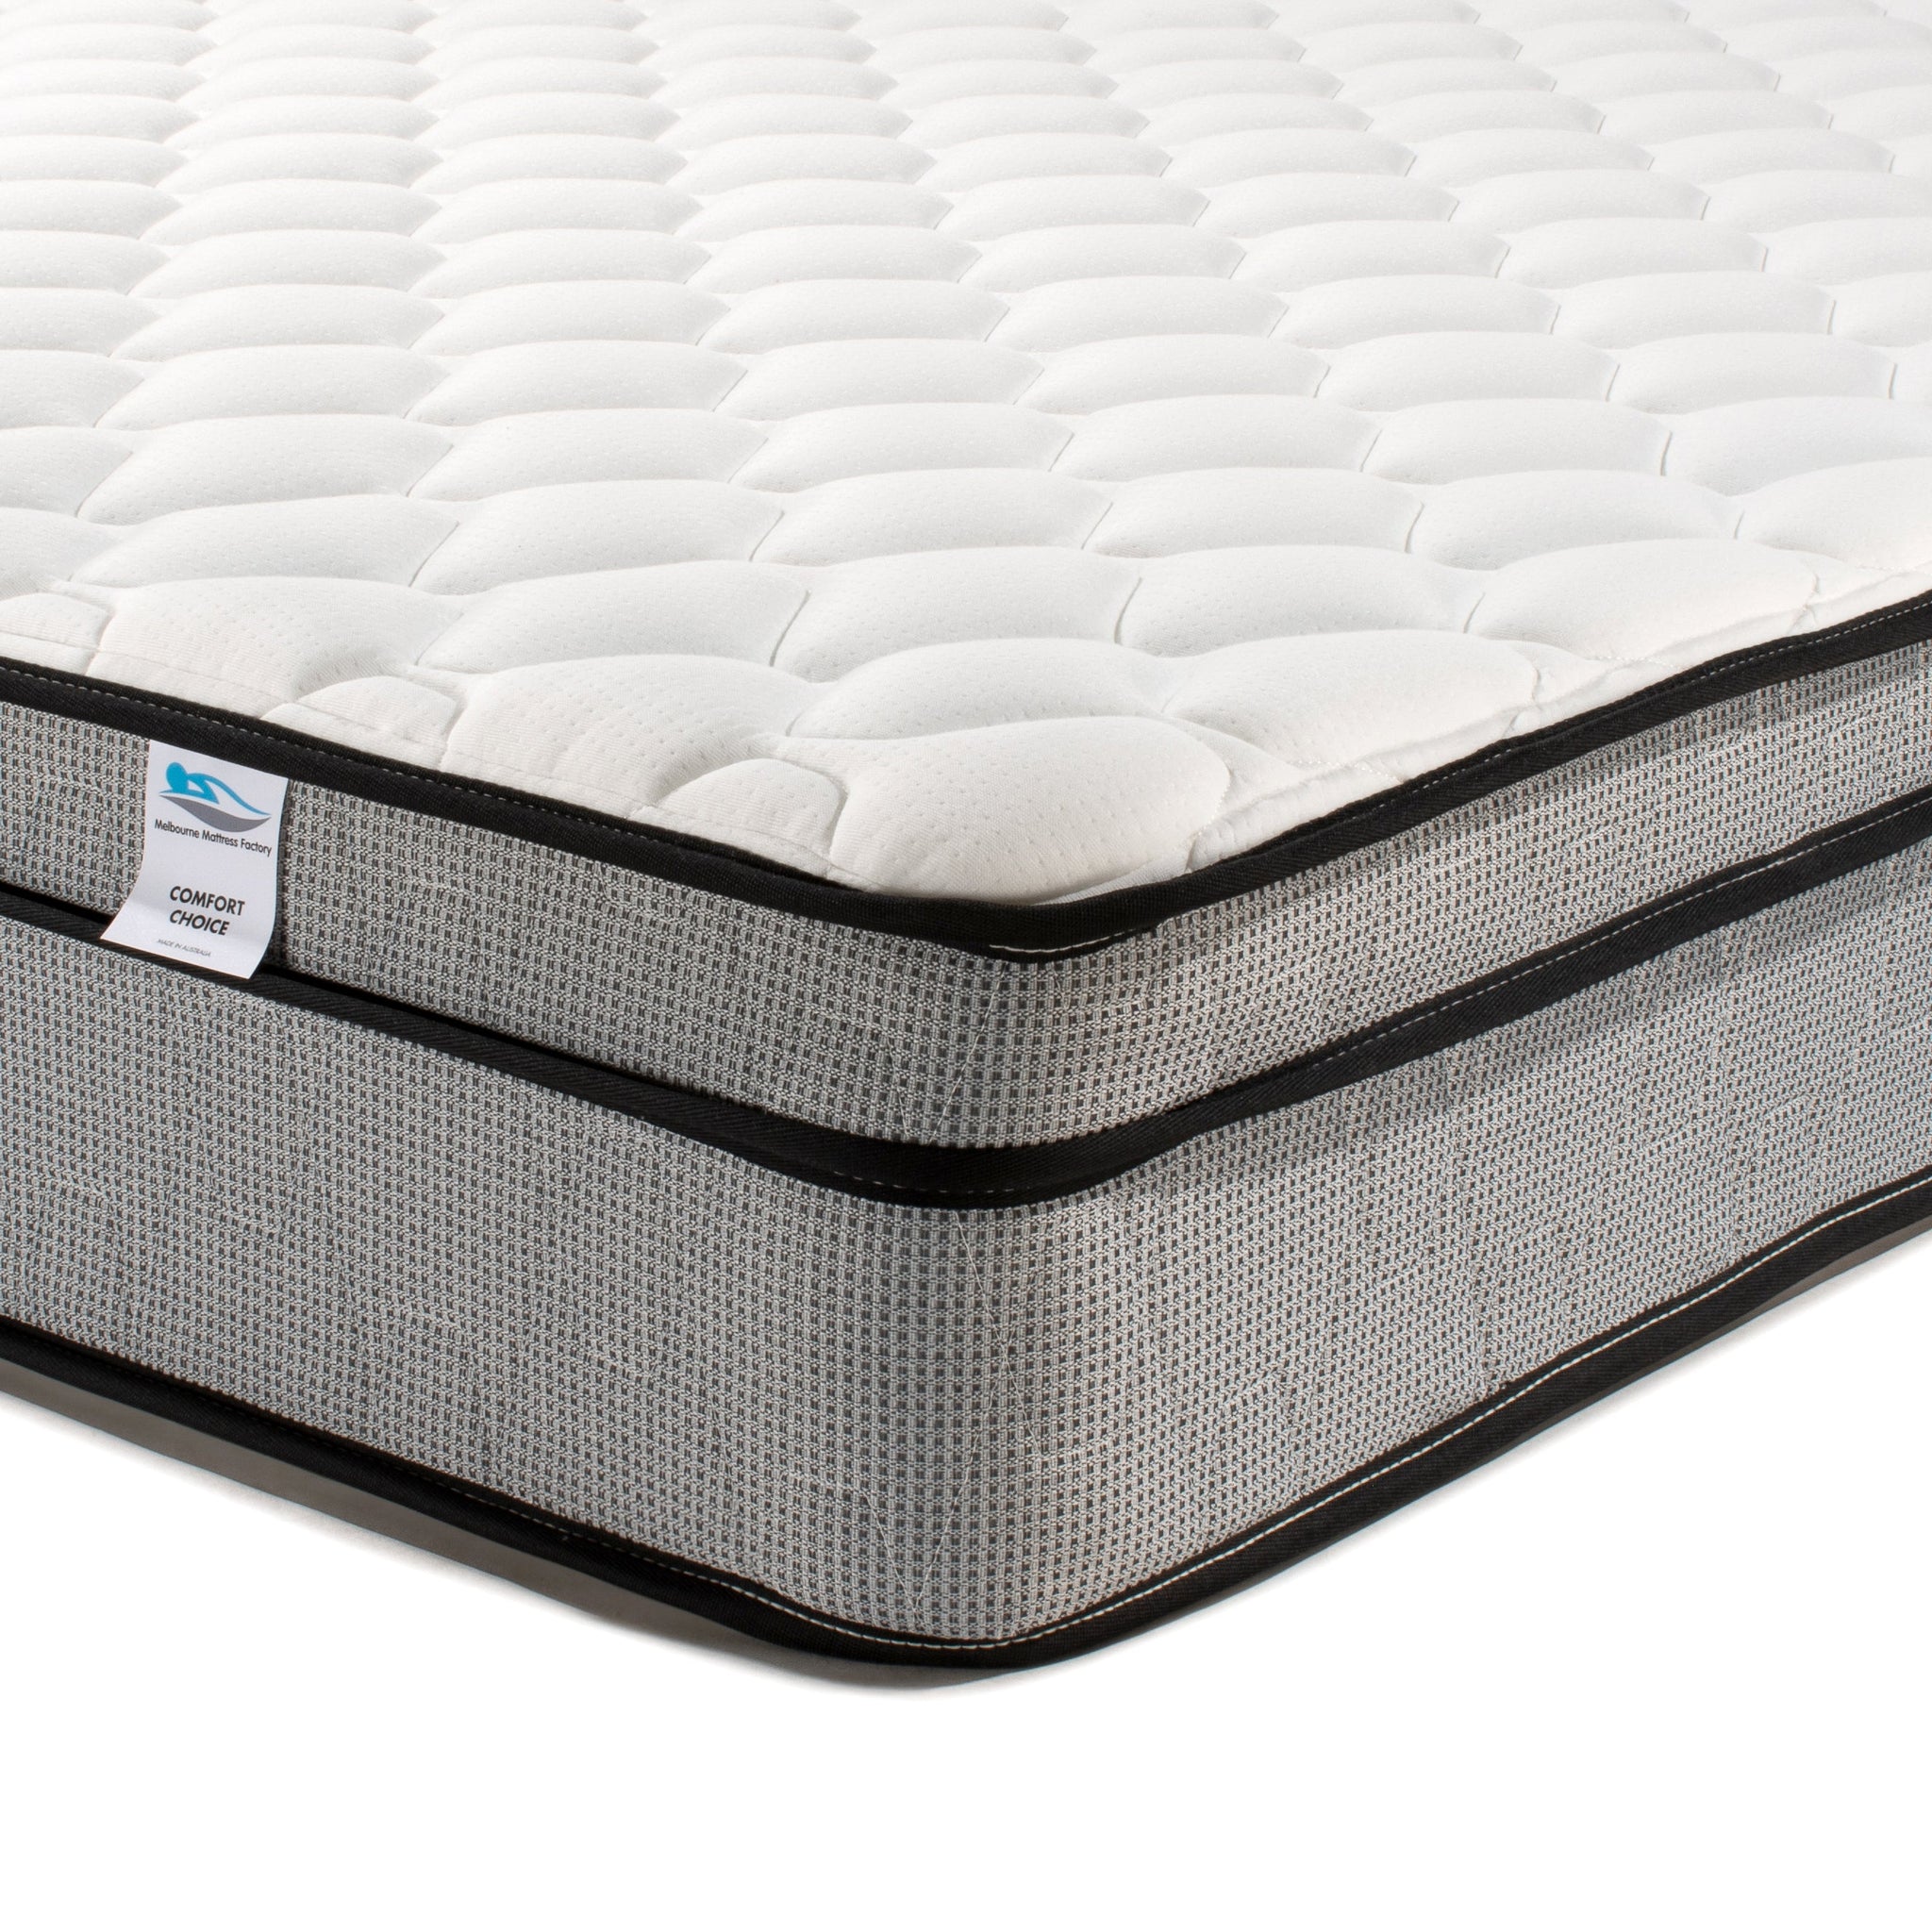 Comfort Choice Double Size Innerspring Mattress - 3 Comfort options  - Australian Made - 15 Year Warranty - Free Delivery - Melbourne Mattress Factory